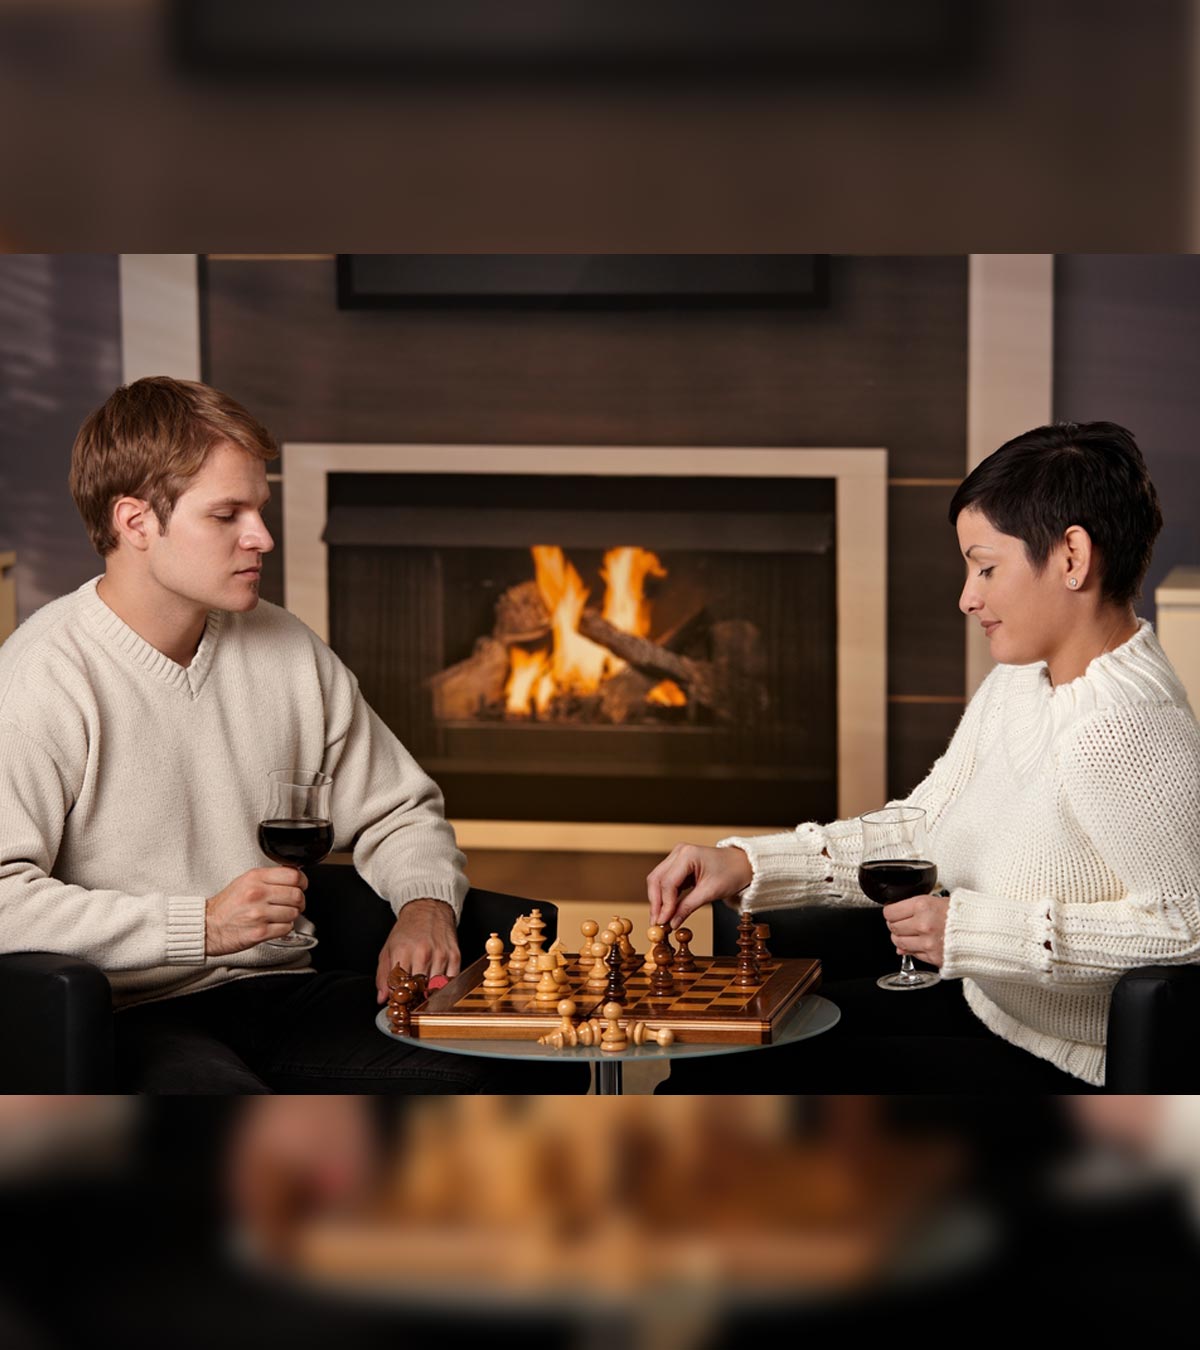 30 Fun Date Night Games For Couples To Play